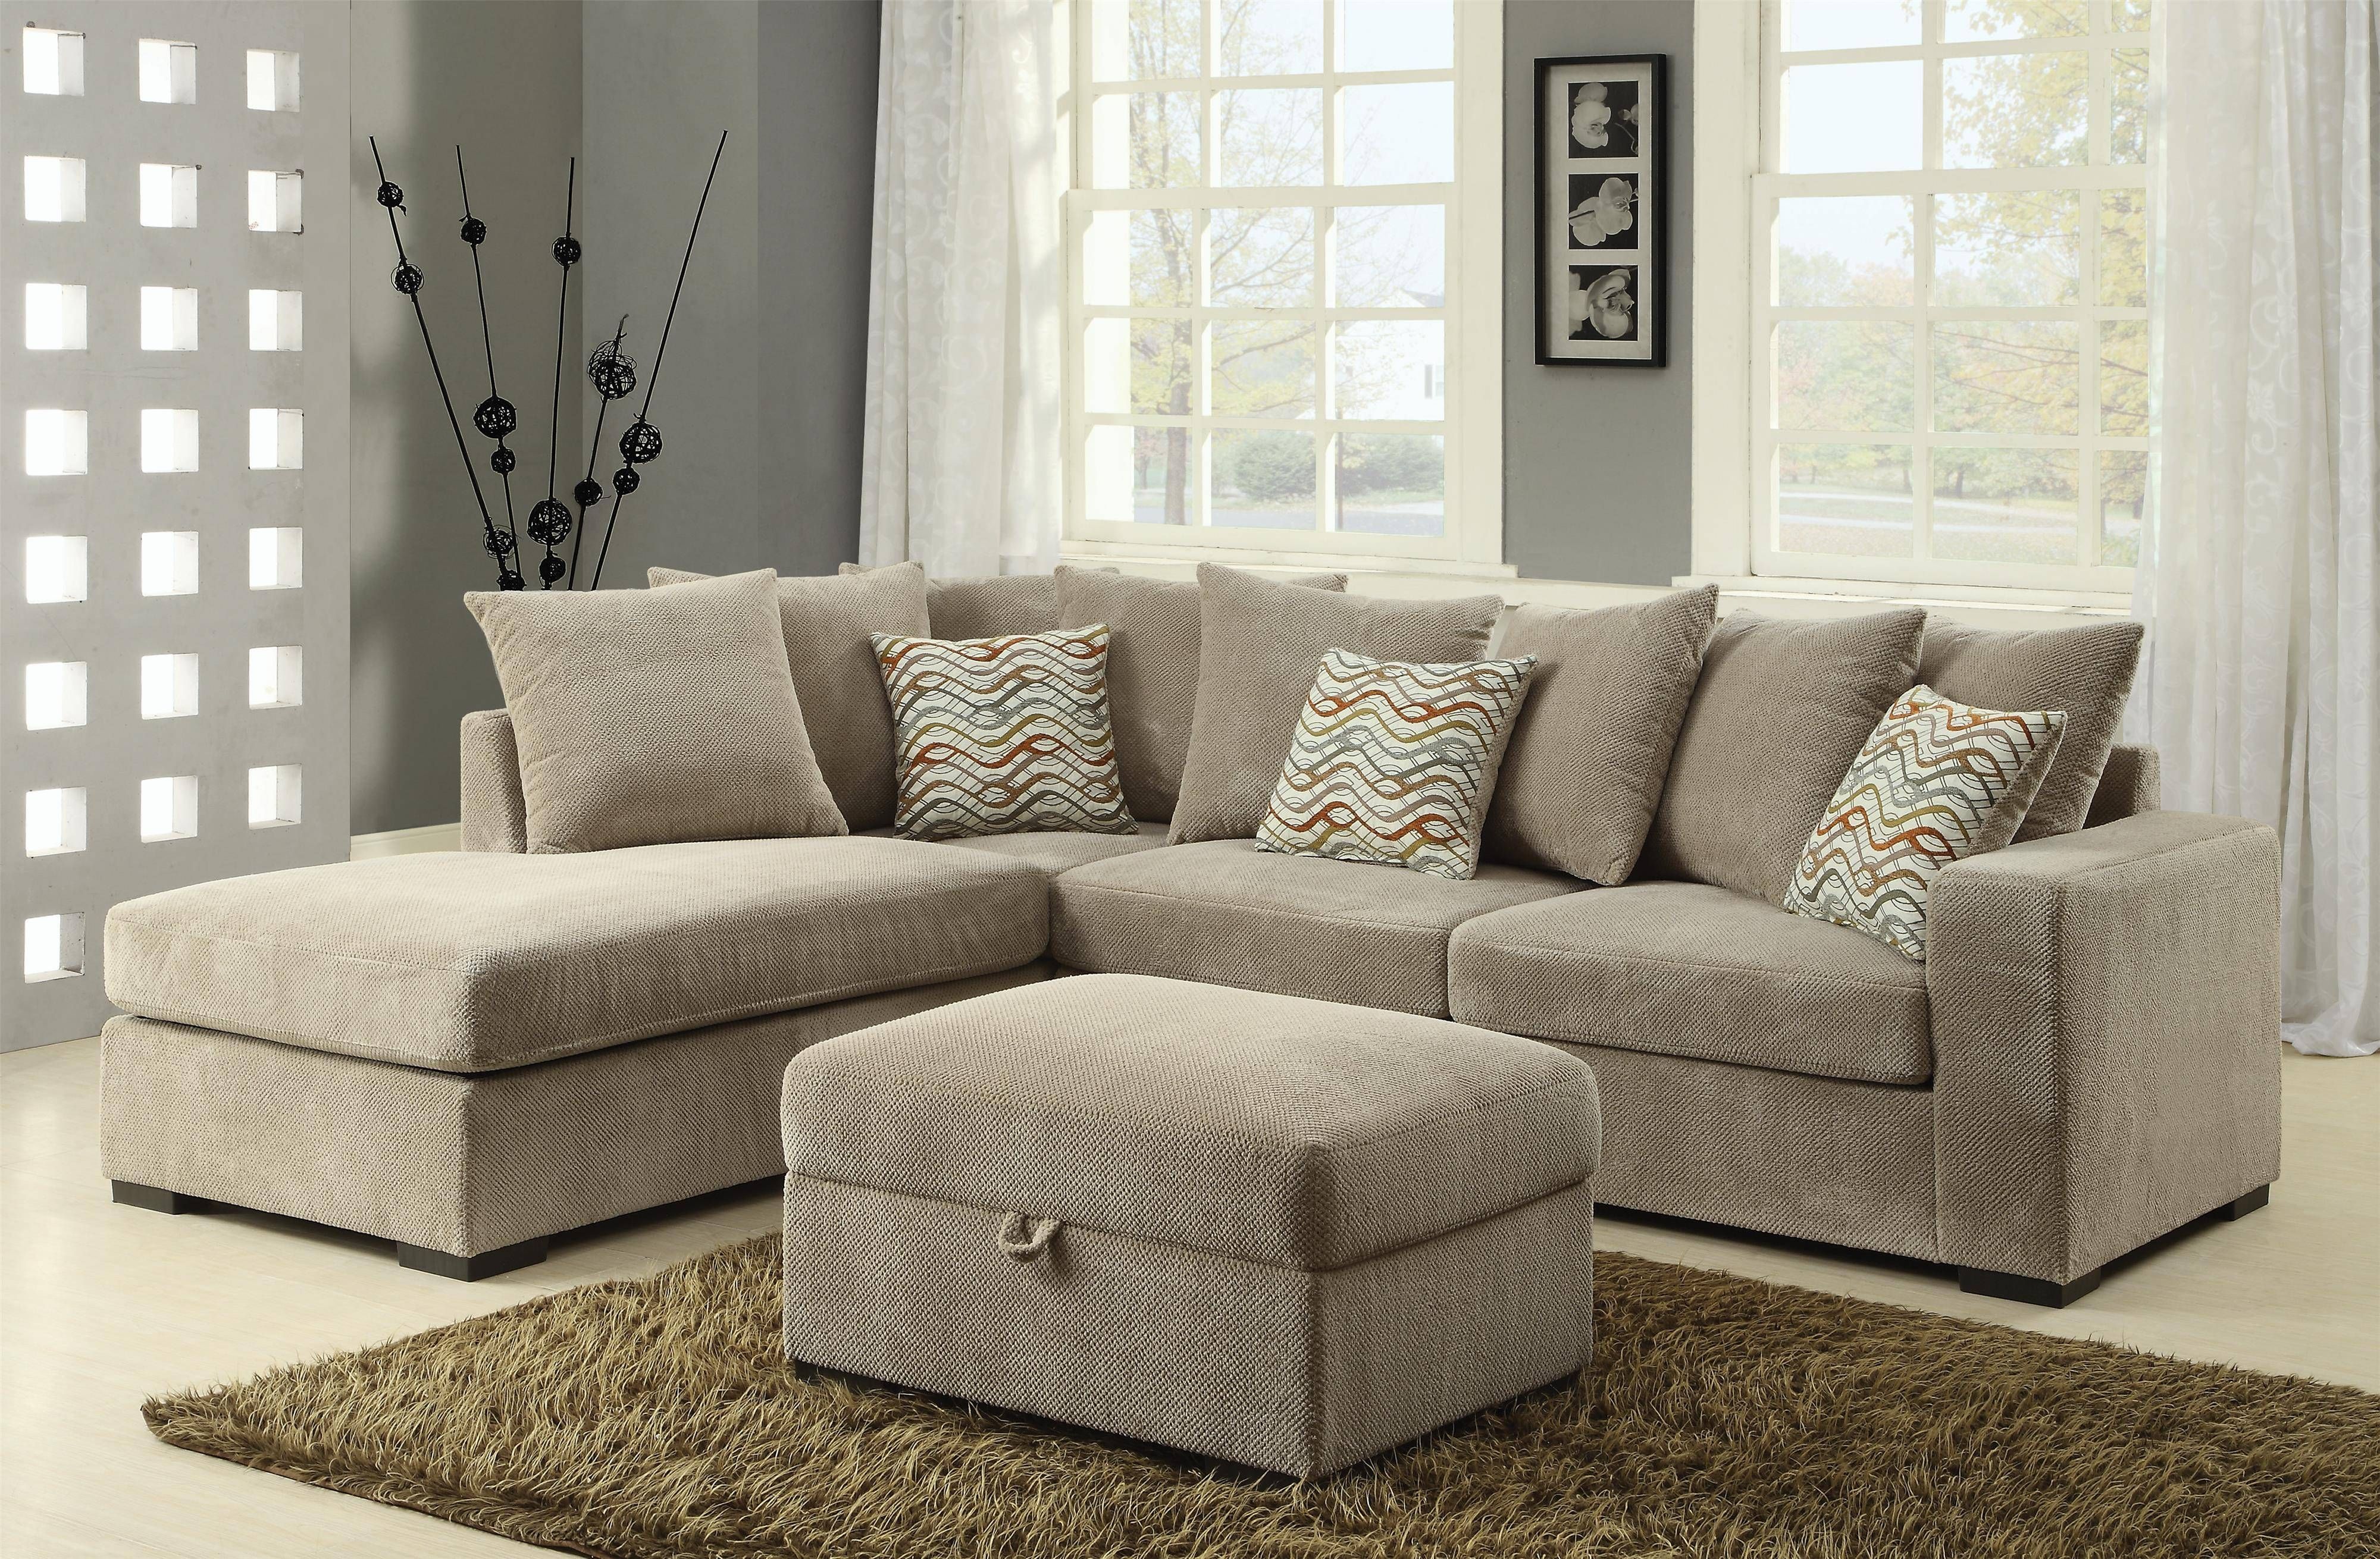 Bedroomdiscounters – Sectional Sofa Sets Within Chenille Sectional Sofas With Chaise (View 9 of 15)